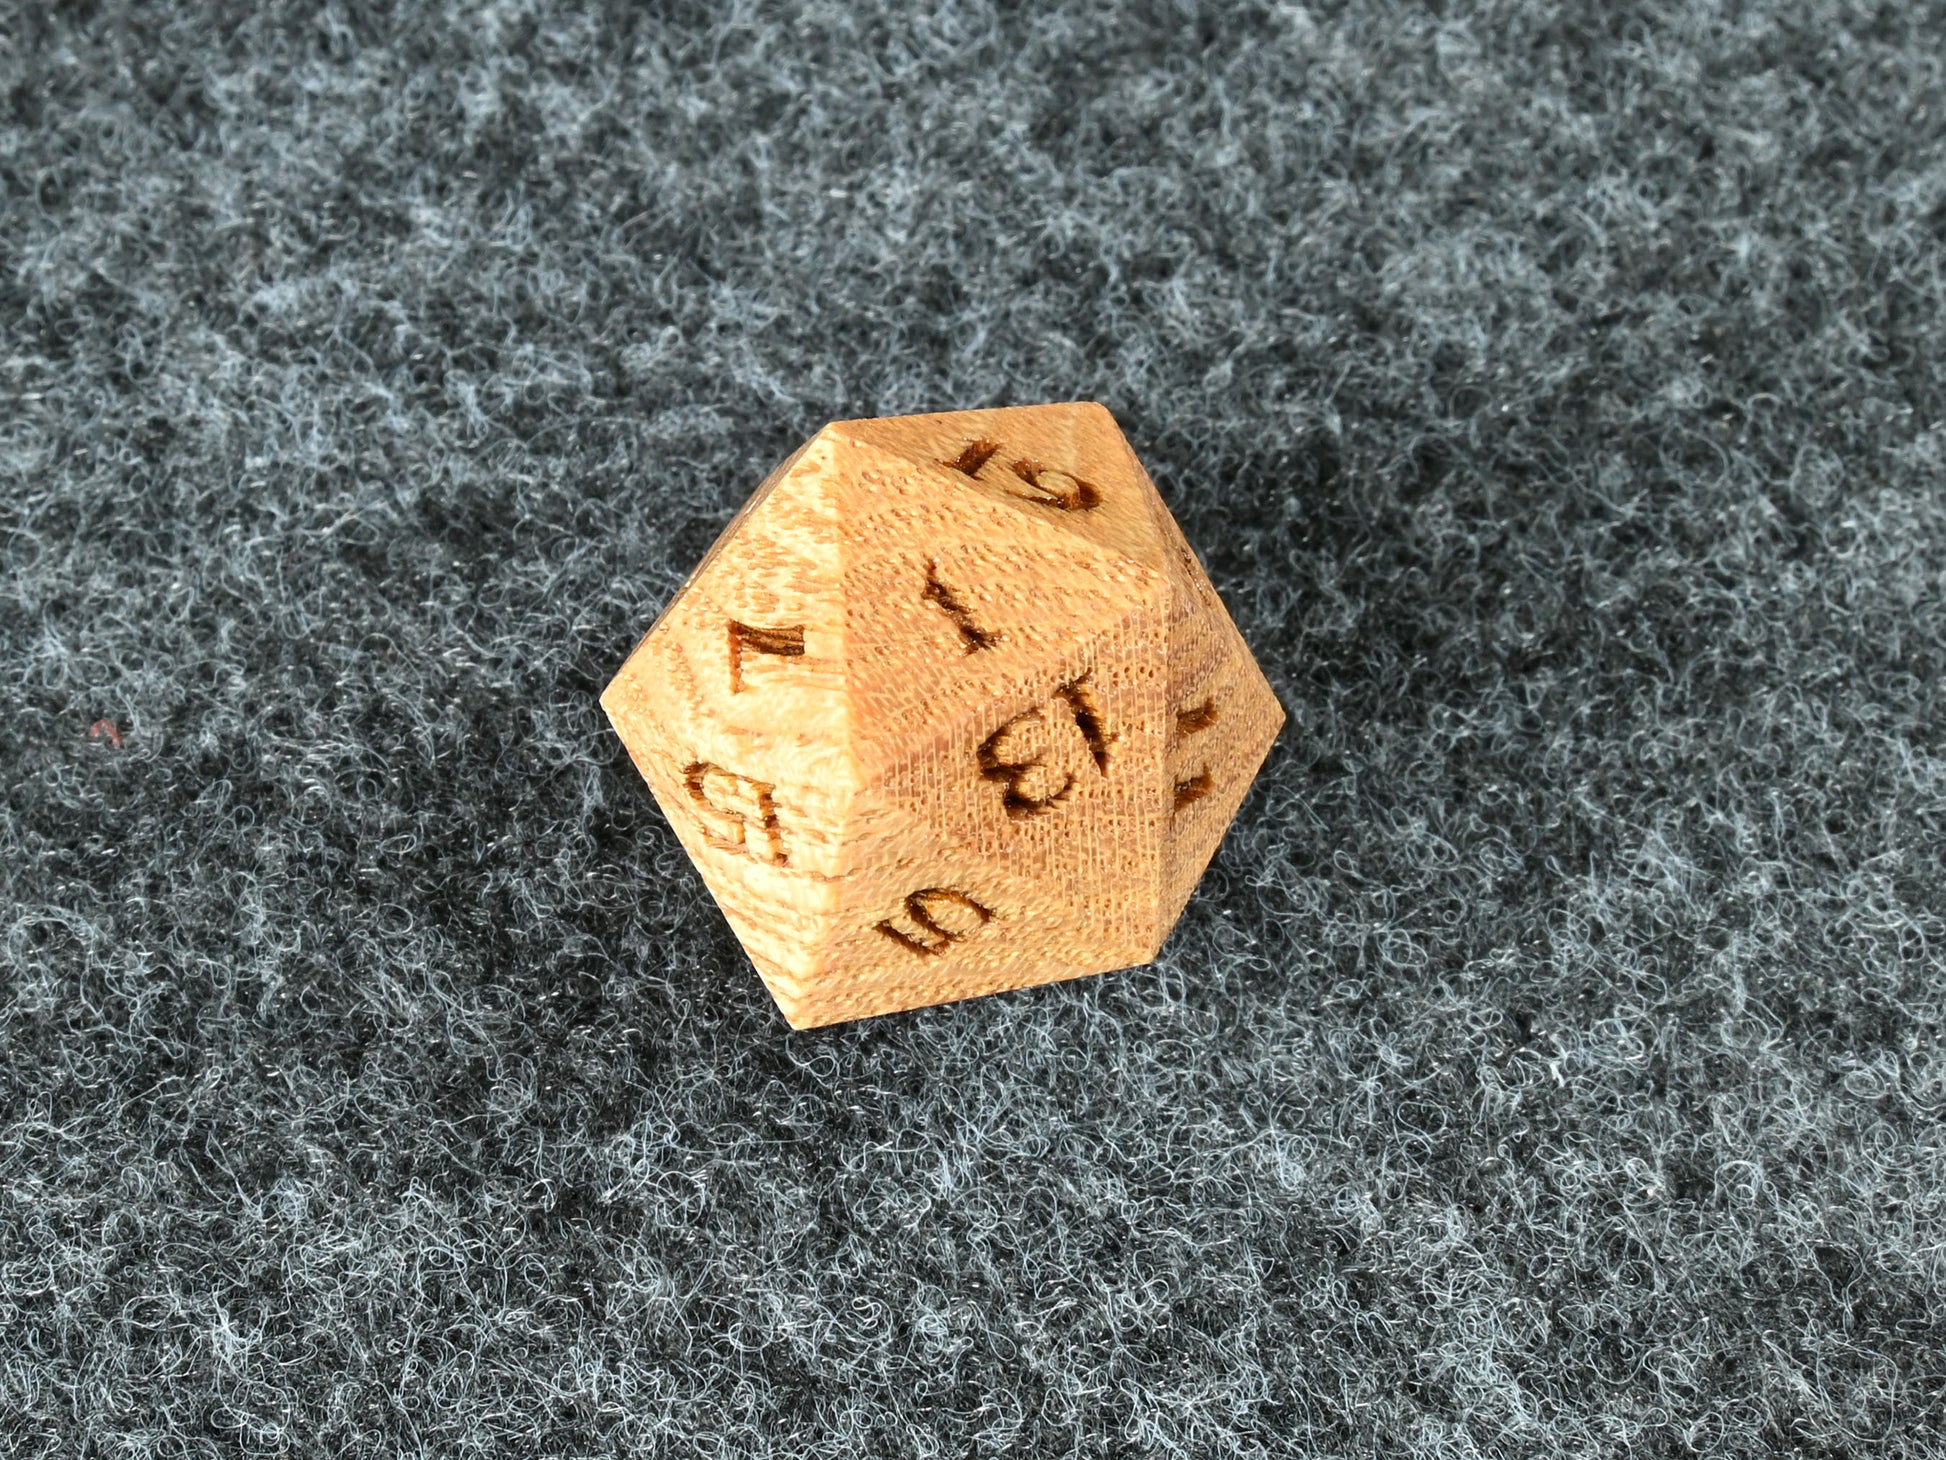 coffeetree wood d20 for dnd rpg